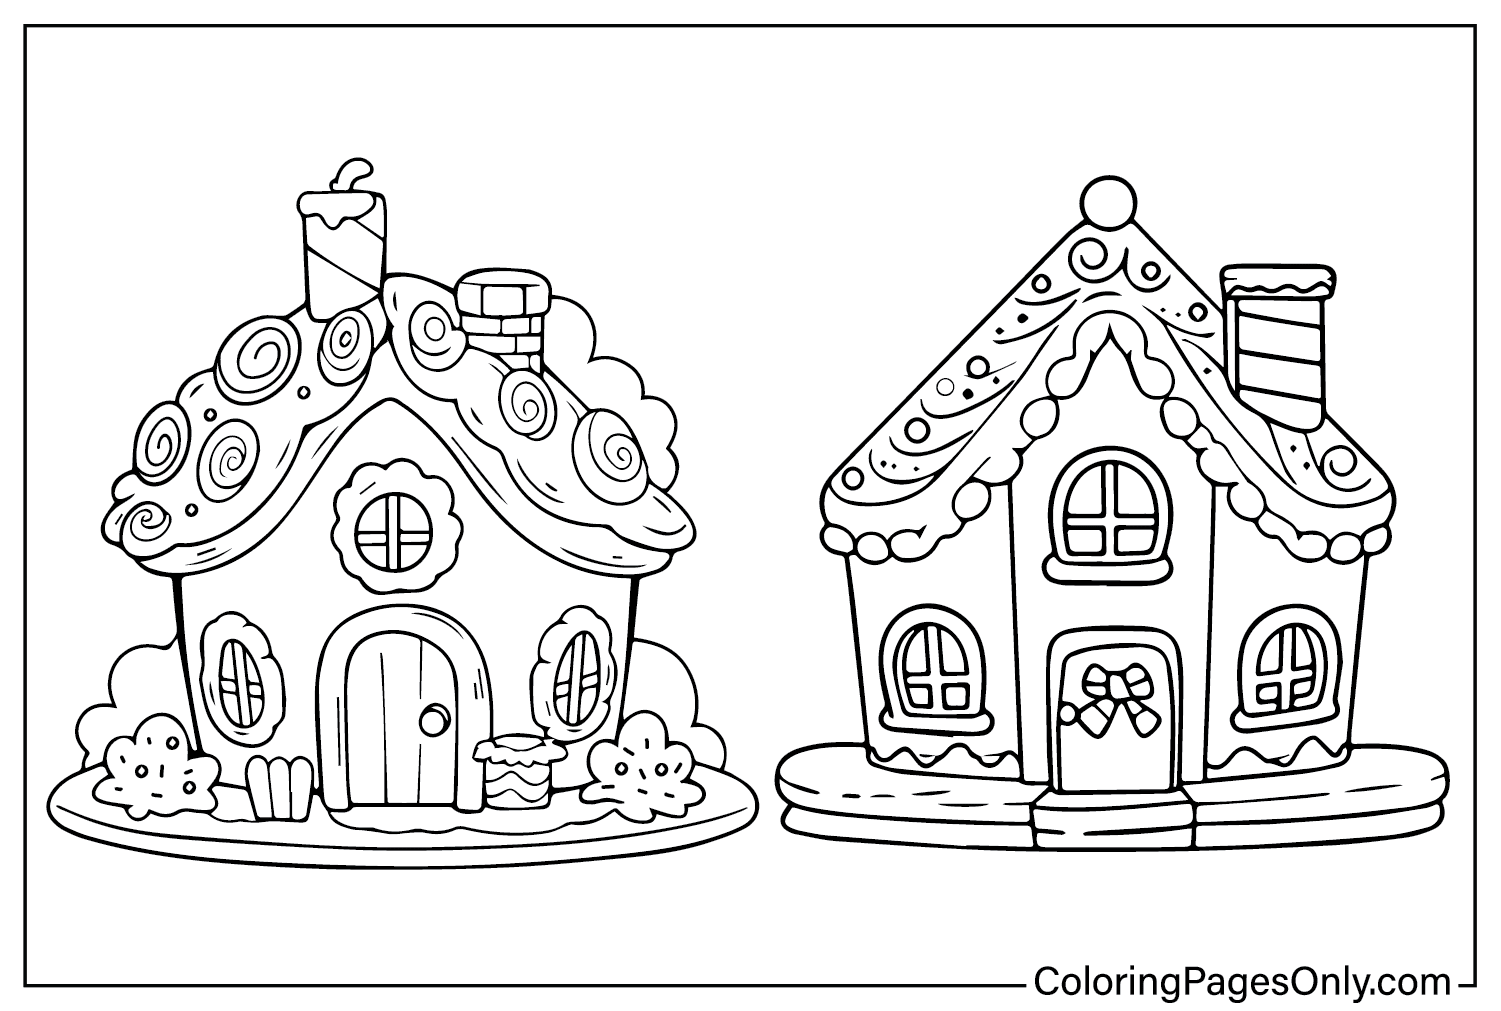 Gingerbread House Coloring Page PDF from Gingerbread House